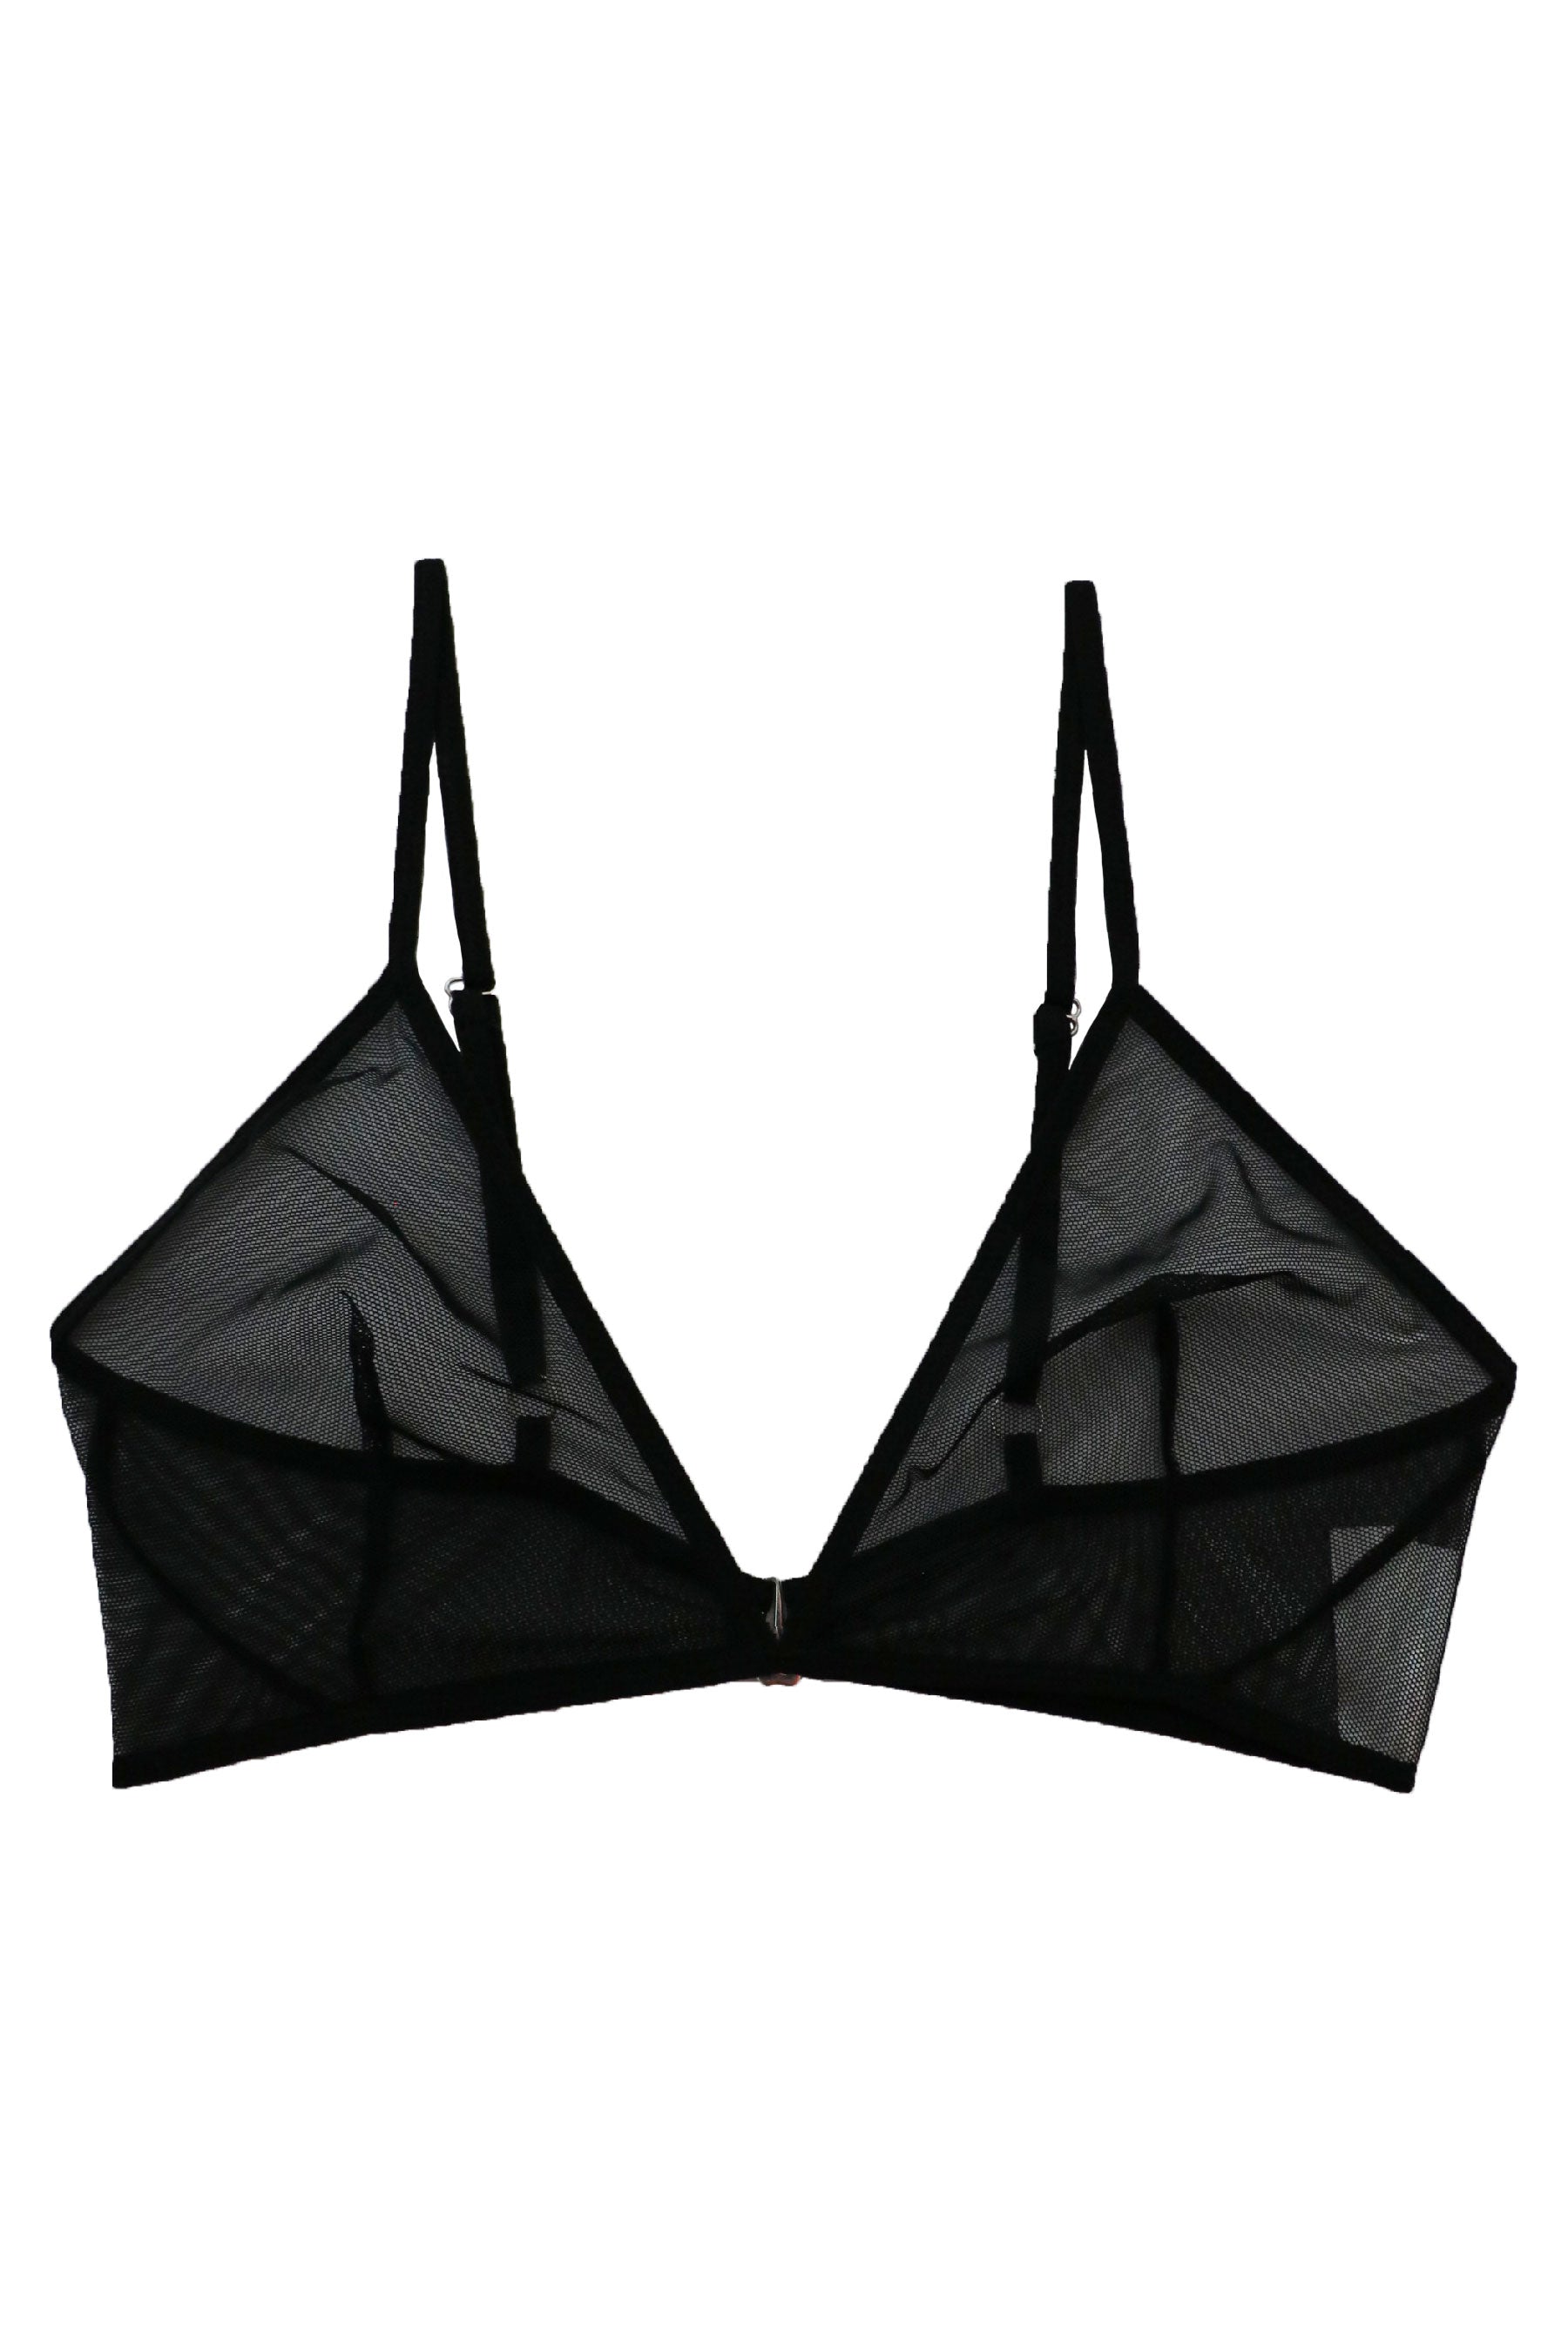 Georgie Bra in Black - MARY YOUNG